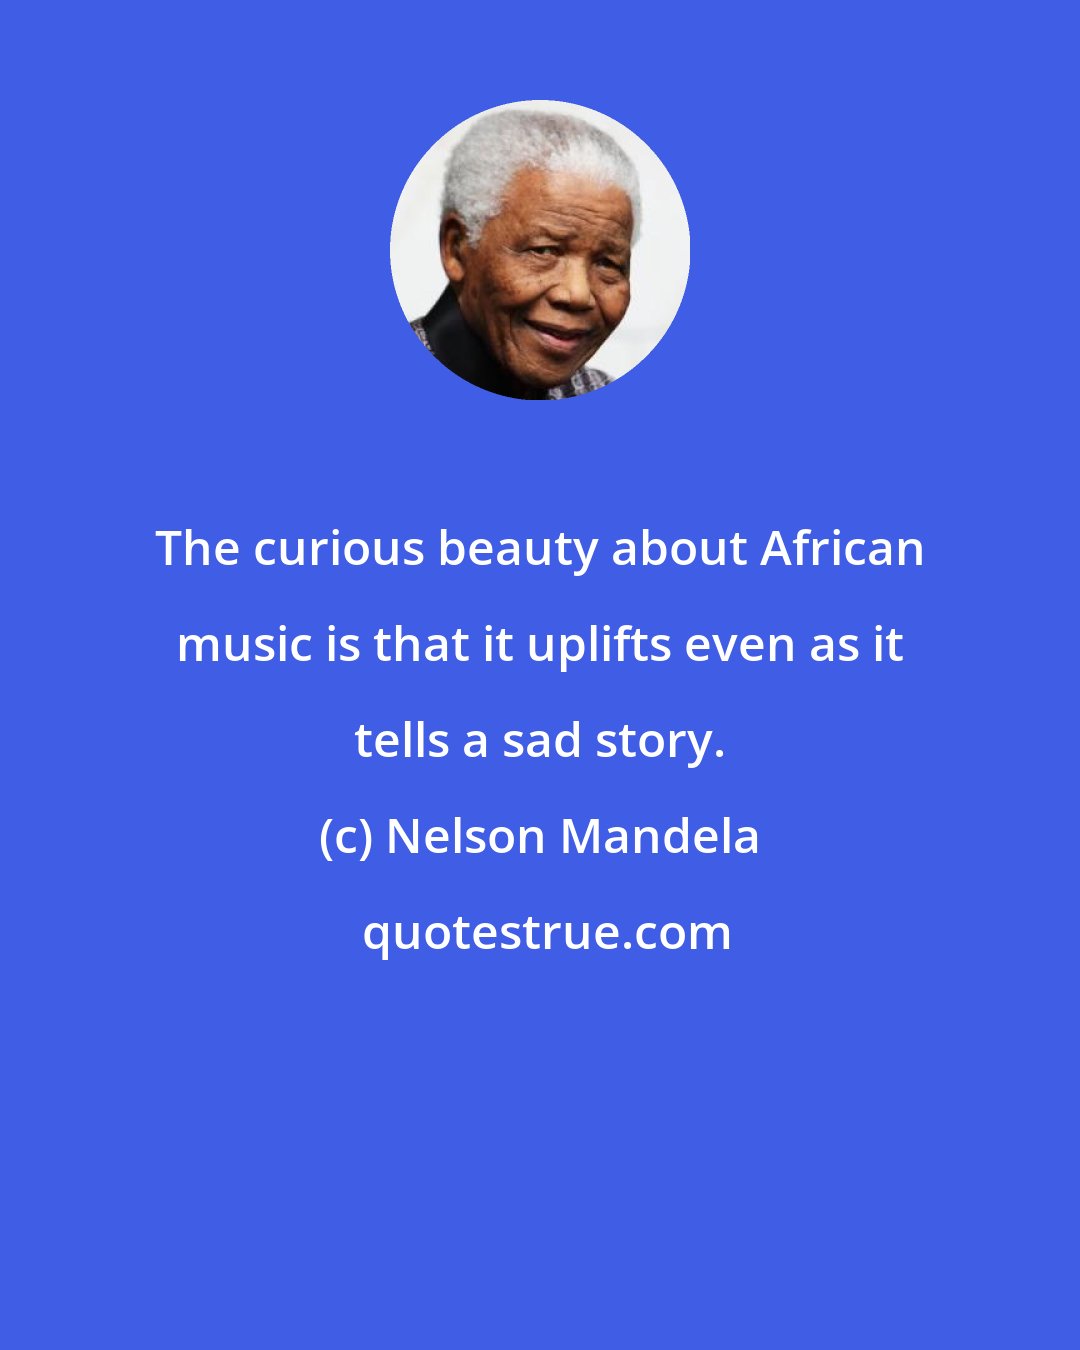 Nelson Mandela: The curious beauty about African music is that it uplifts even as it tells a sad story.